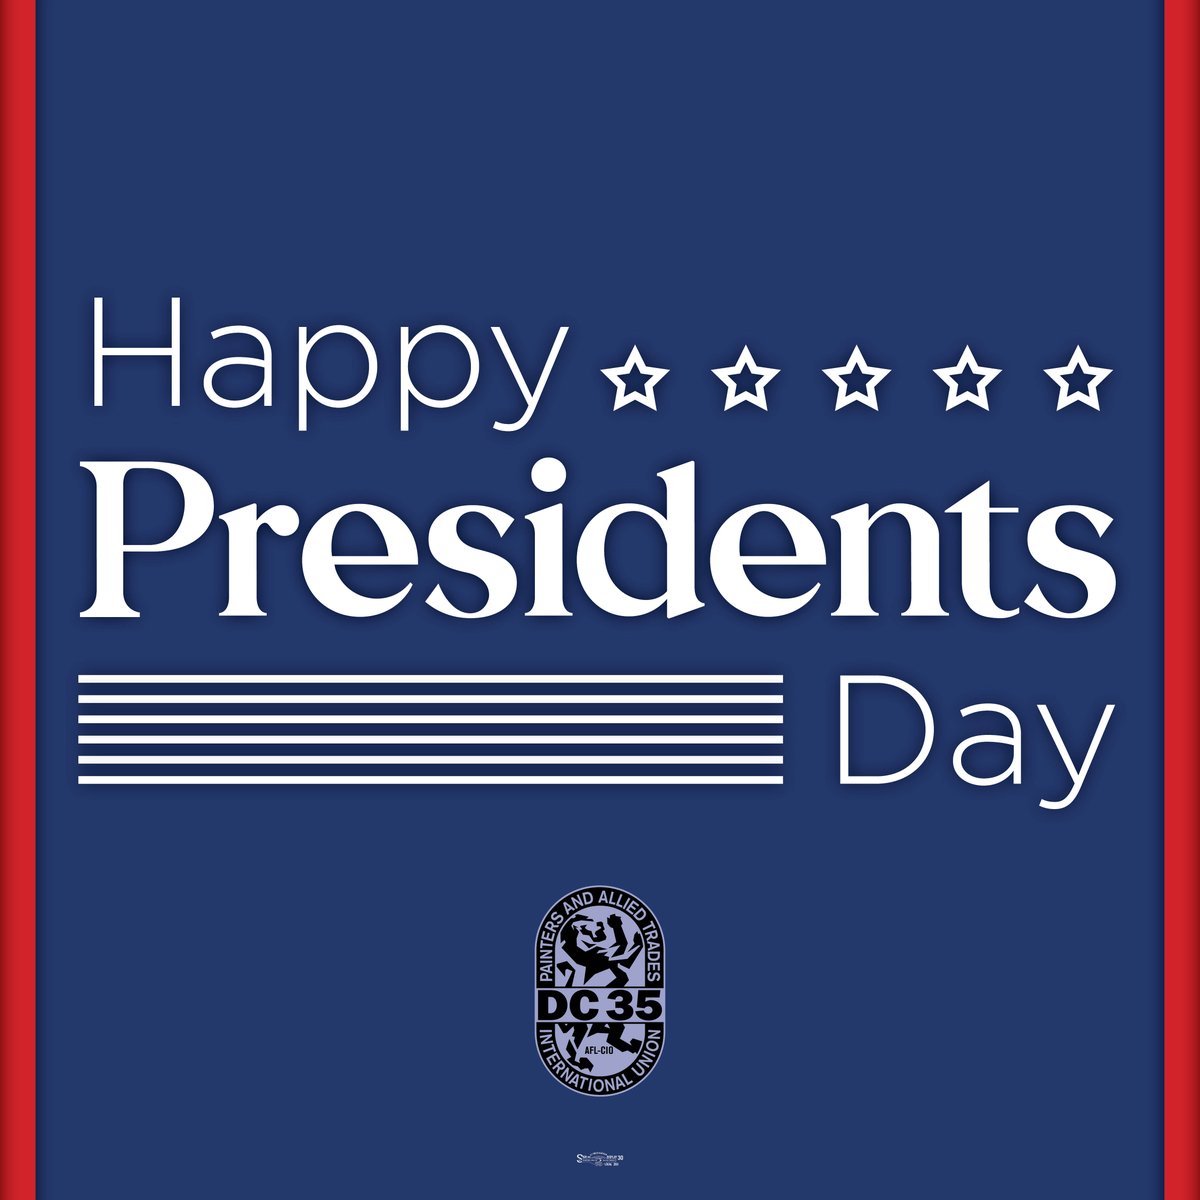 DC 35 wishes everyone a Happy Presidents Day.